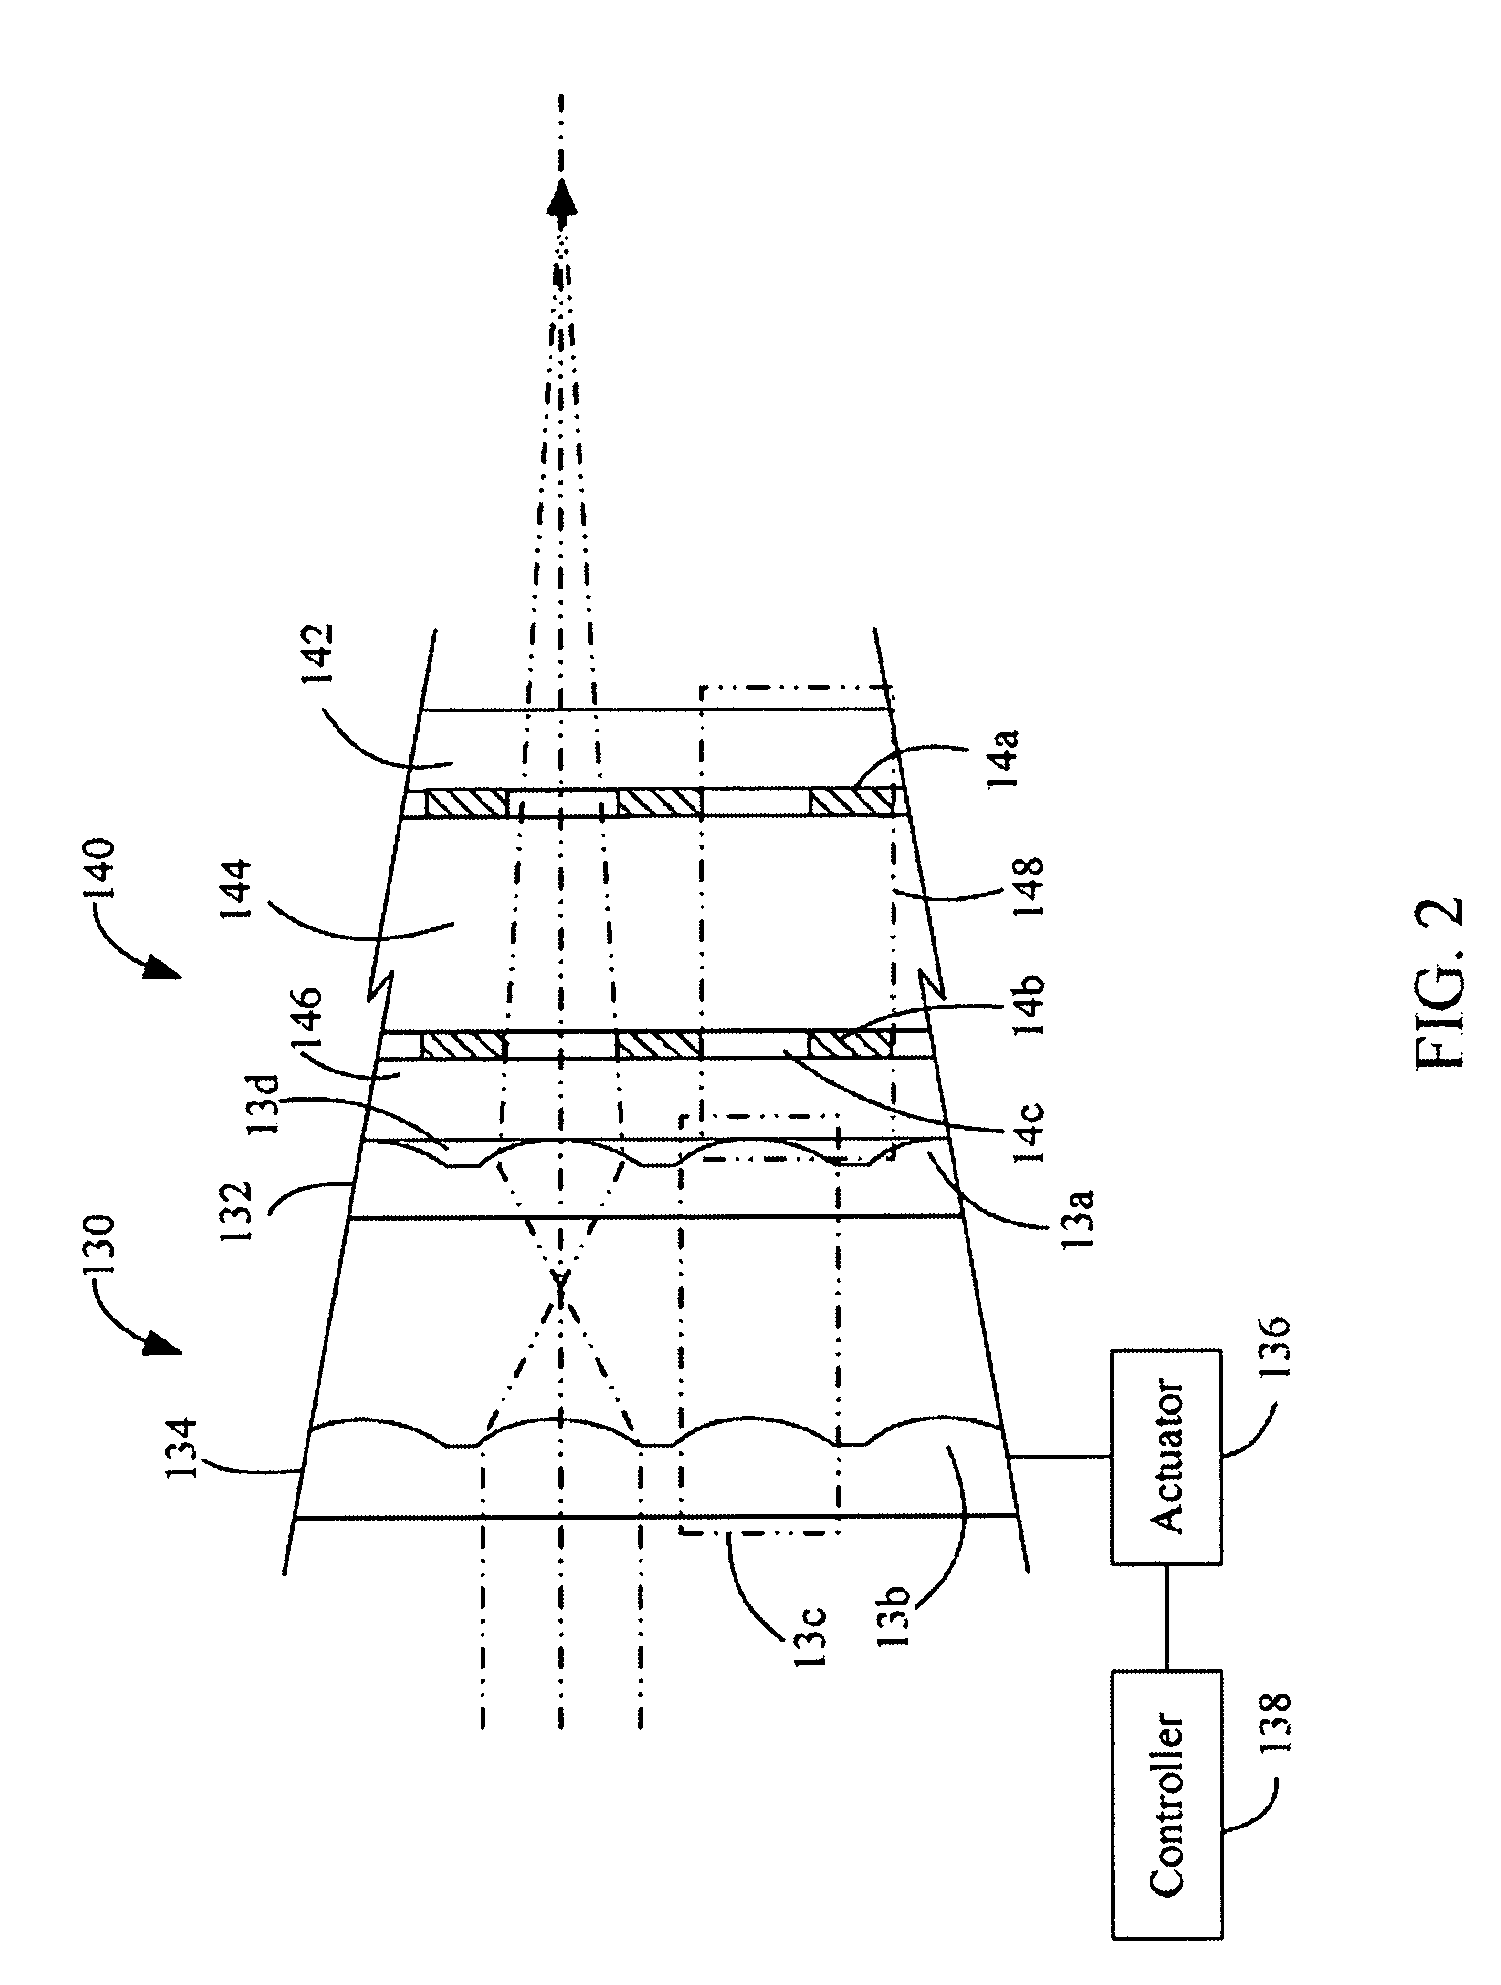 Micro lens array unit having at least one of first and second micro lens arrays movable for changing the effective focal length of the micro lens array unit and liquid crystal display projection device using same